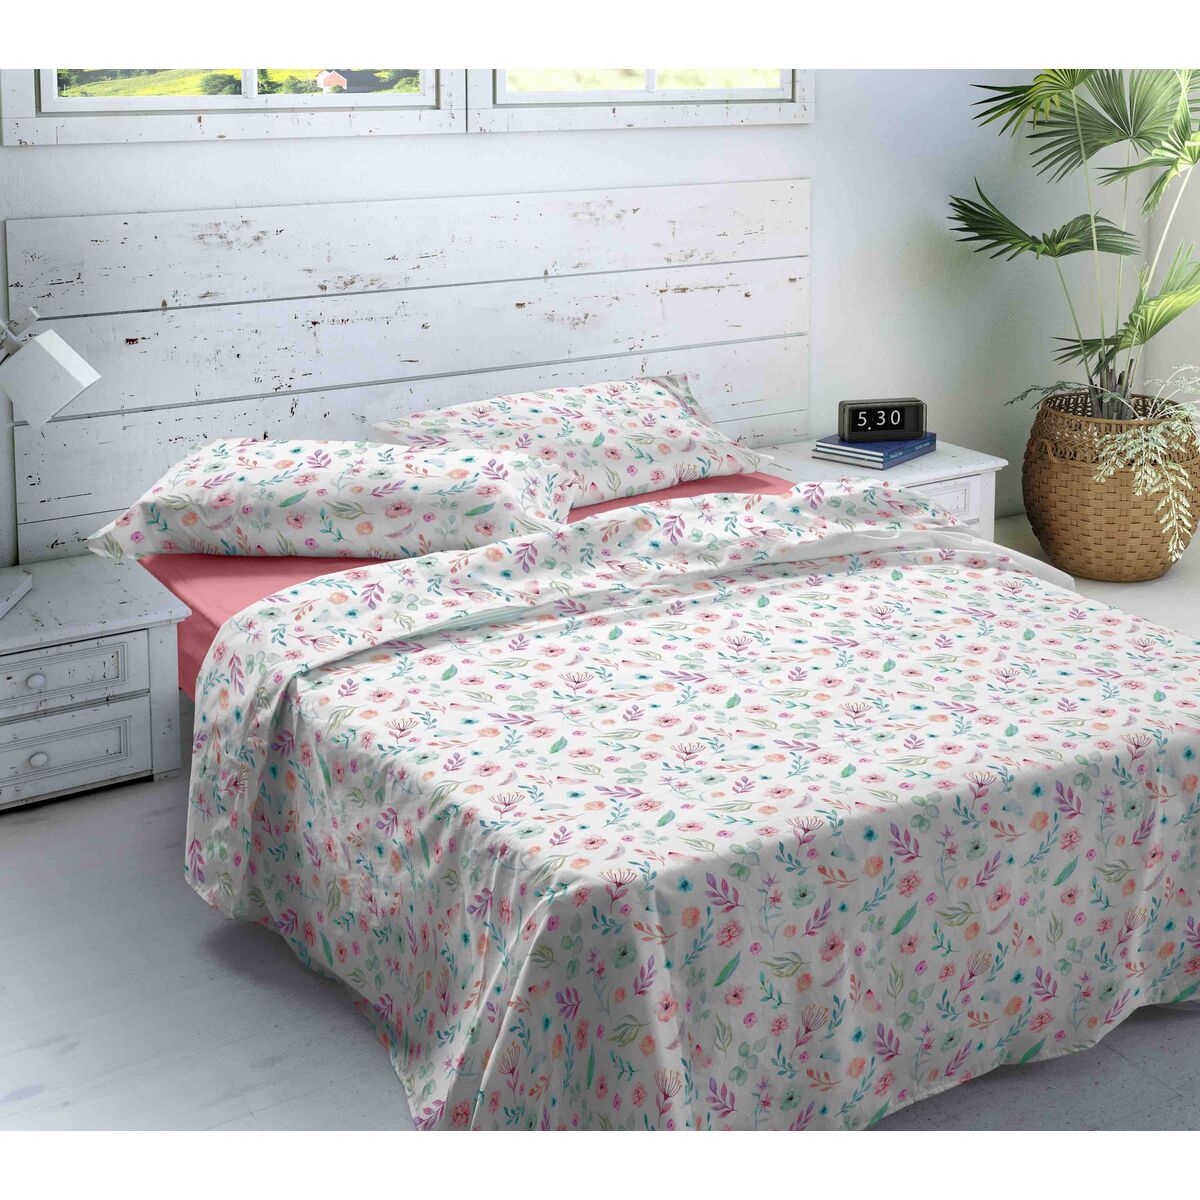 Rin Natural Sheets Game (letto king size)